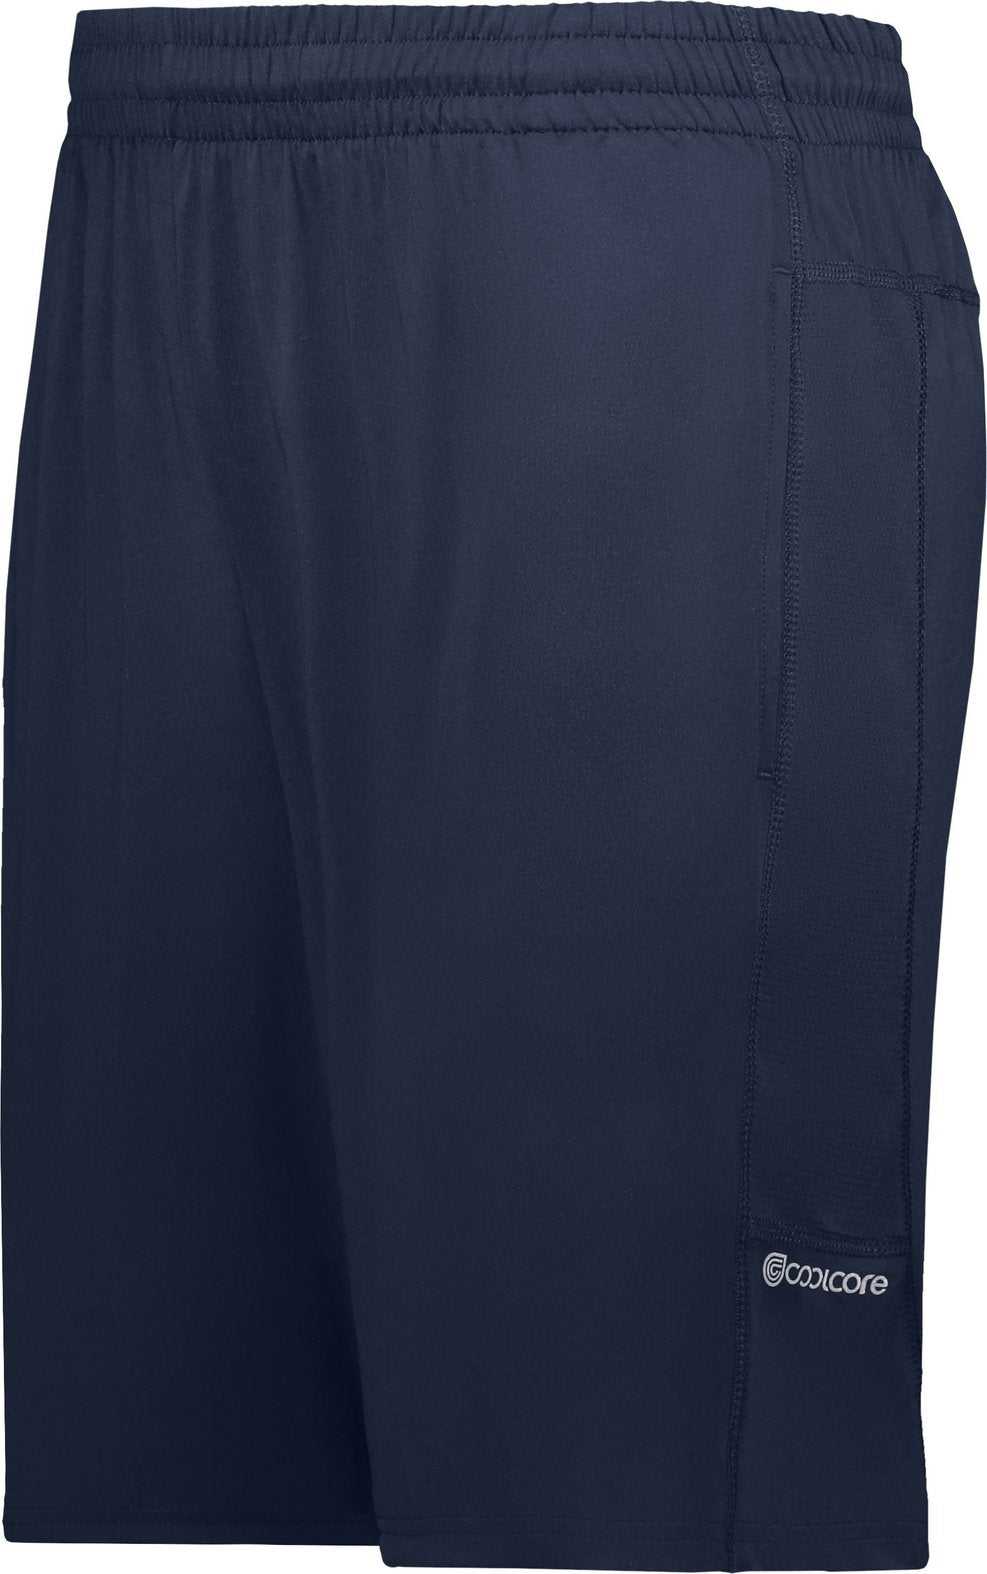 Holloway 222594 Coolcore Shorts - Navy - HIT a Double